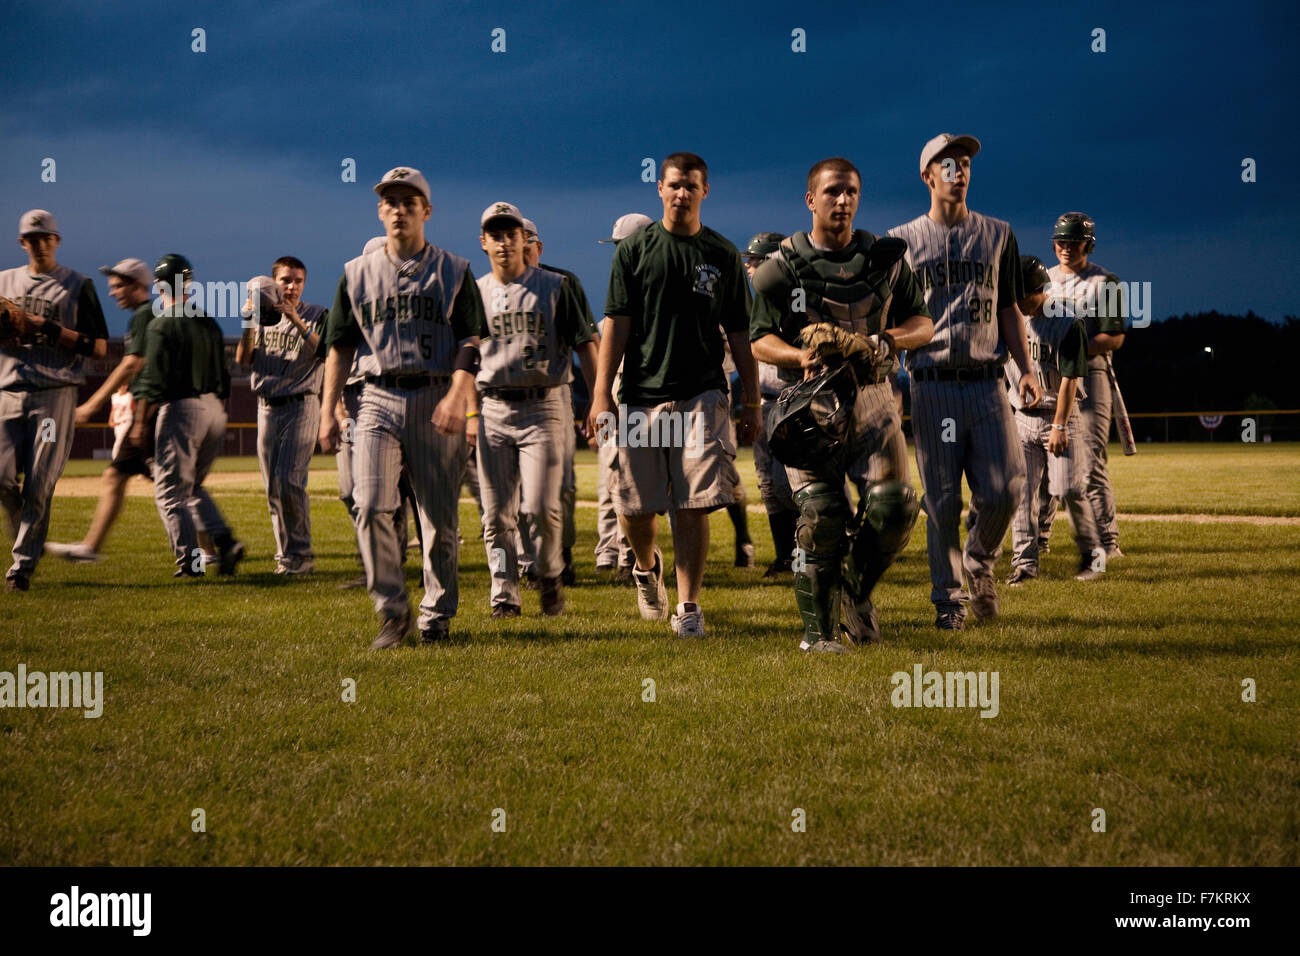 High school baseball features Nashoba Chieftans playing a nightgame in Western MA outside of Boston Stock Photo